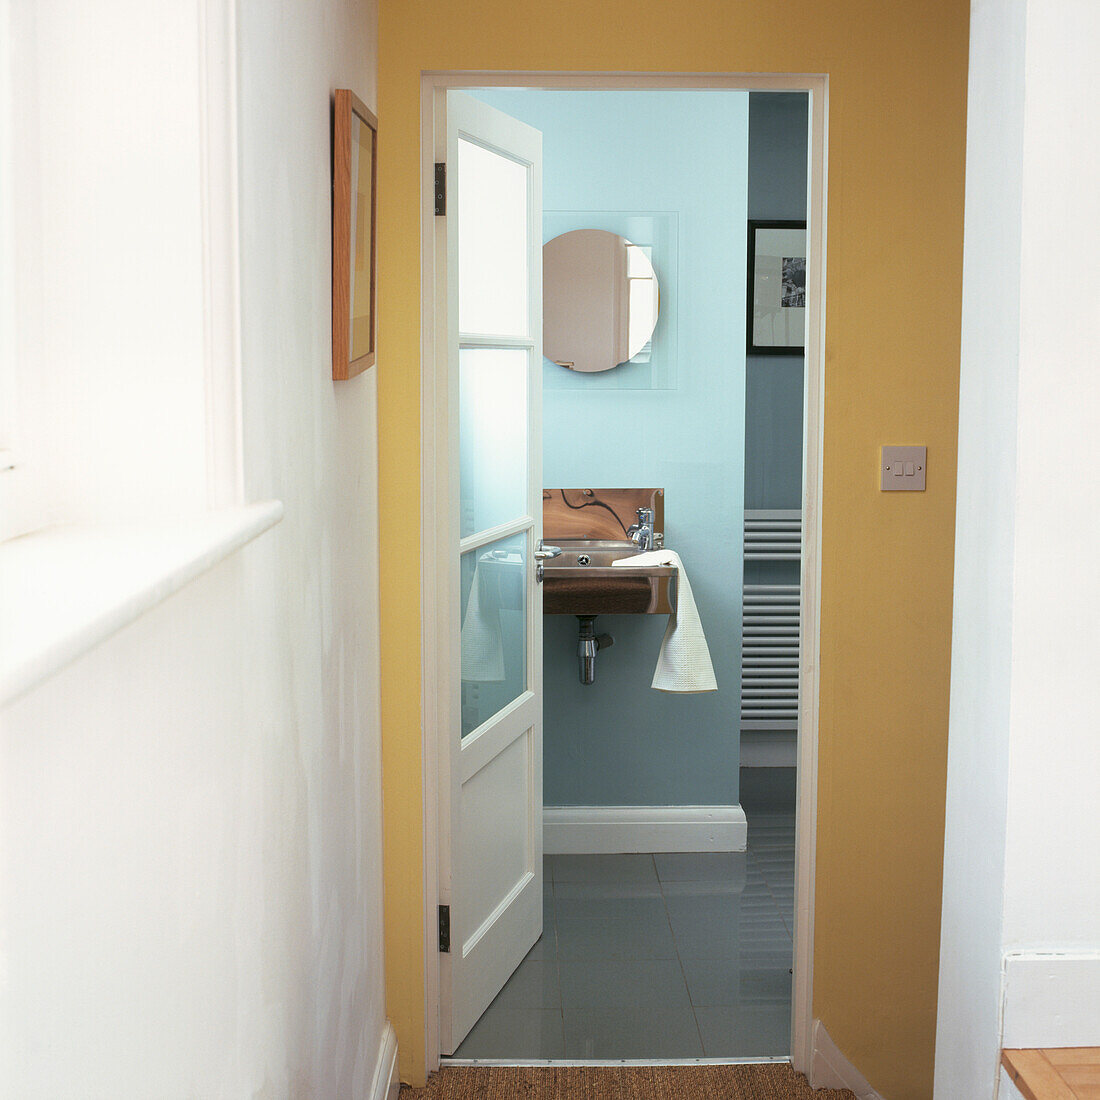 View of blue painted bathroom with metal basin through glass doorway in yellow painted hall